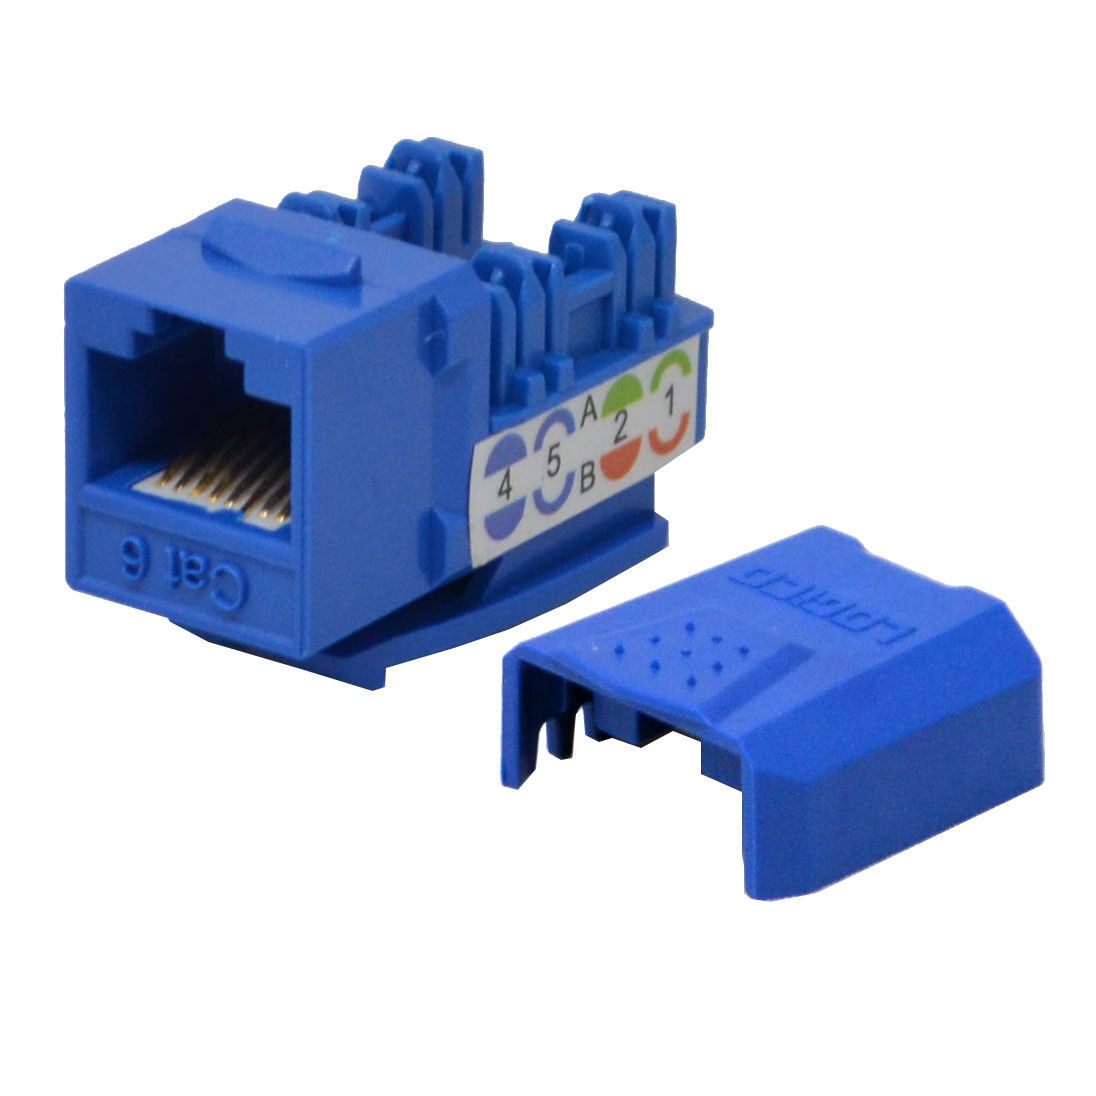 Primary image for 25 pack lot Keystone Jack Cat6 Blue Network Ethernet 110 Punchdown 8P8C